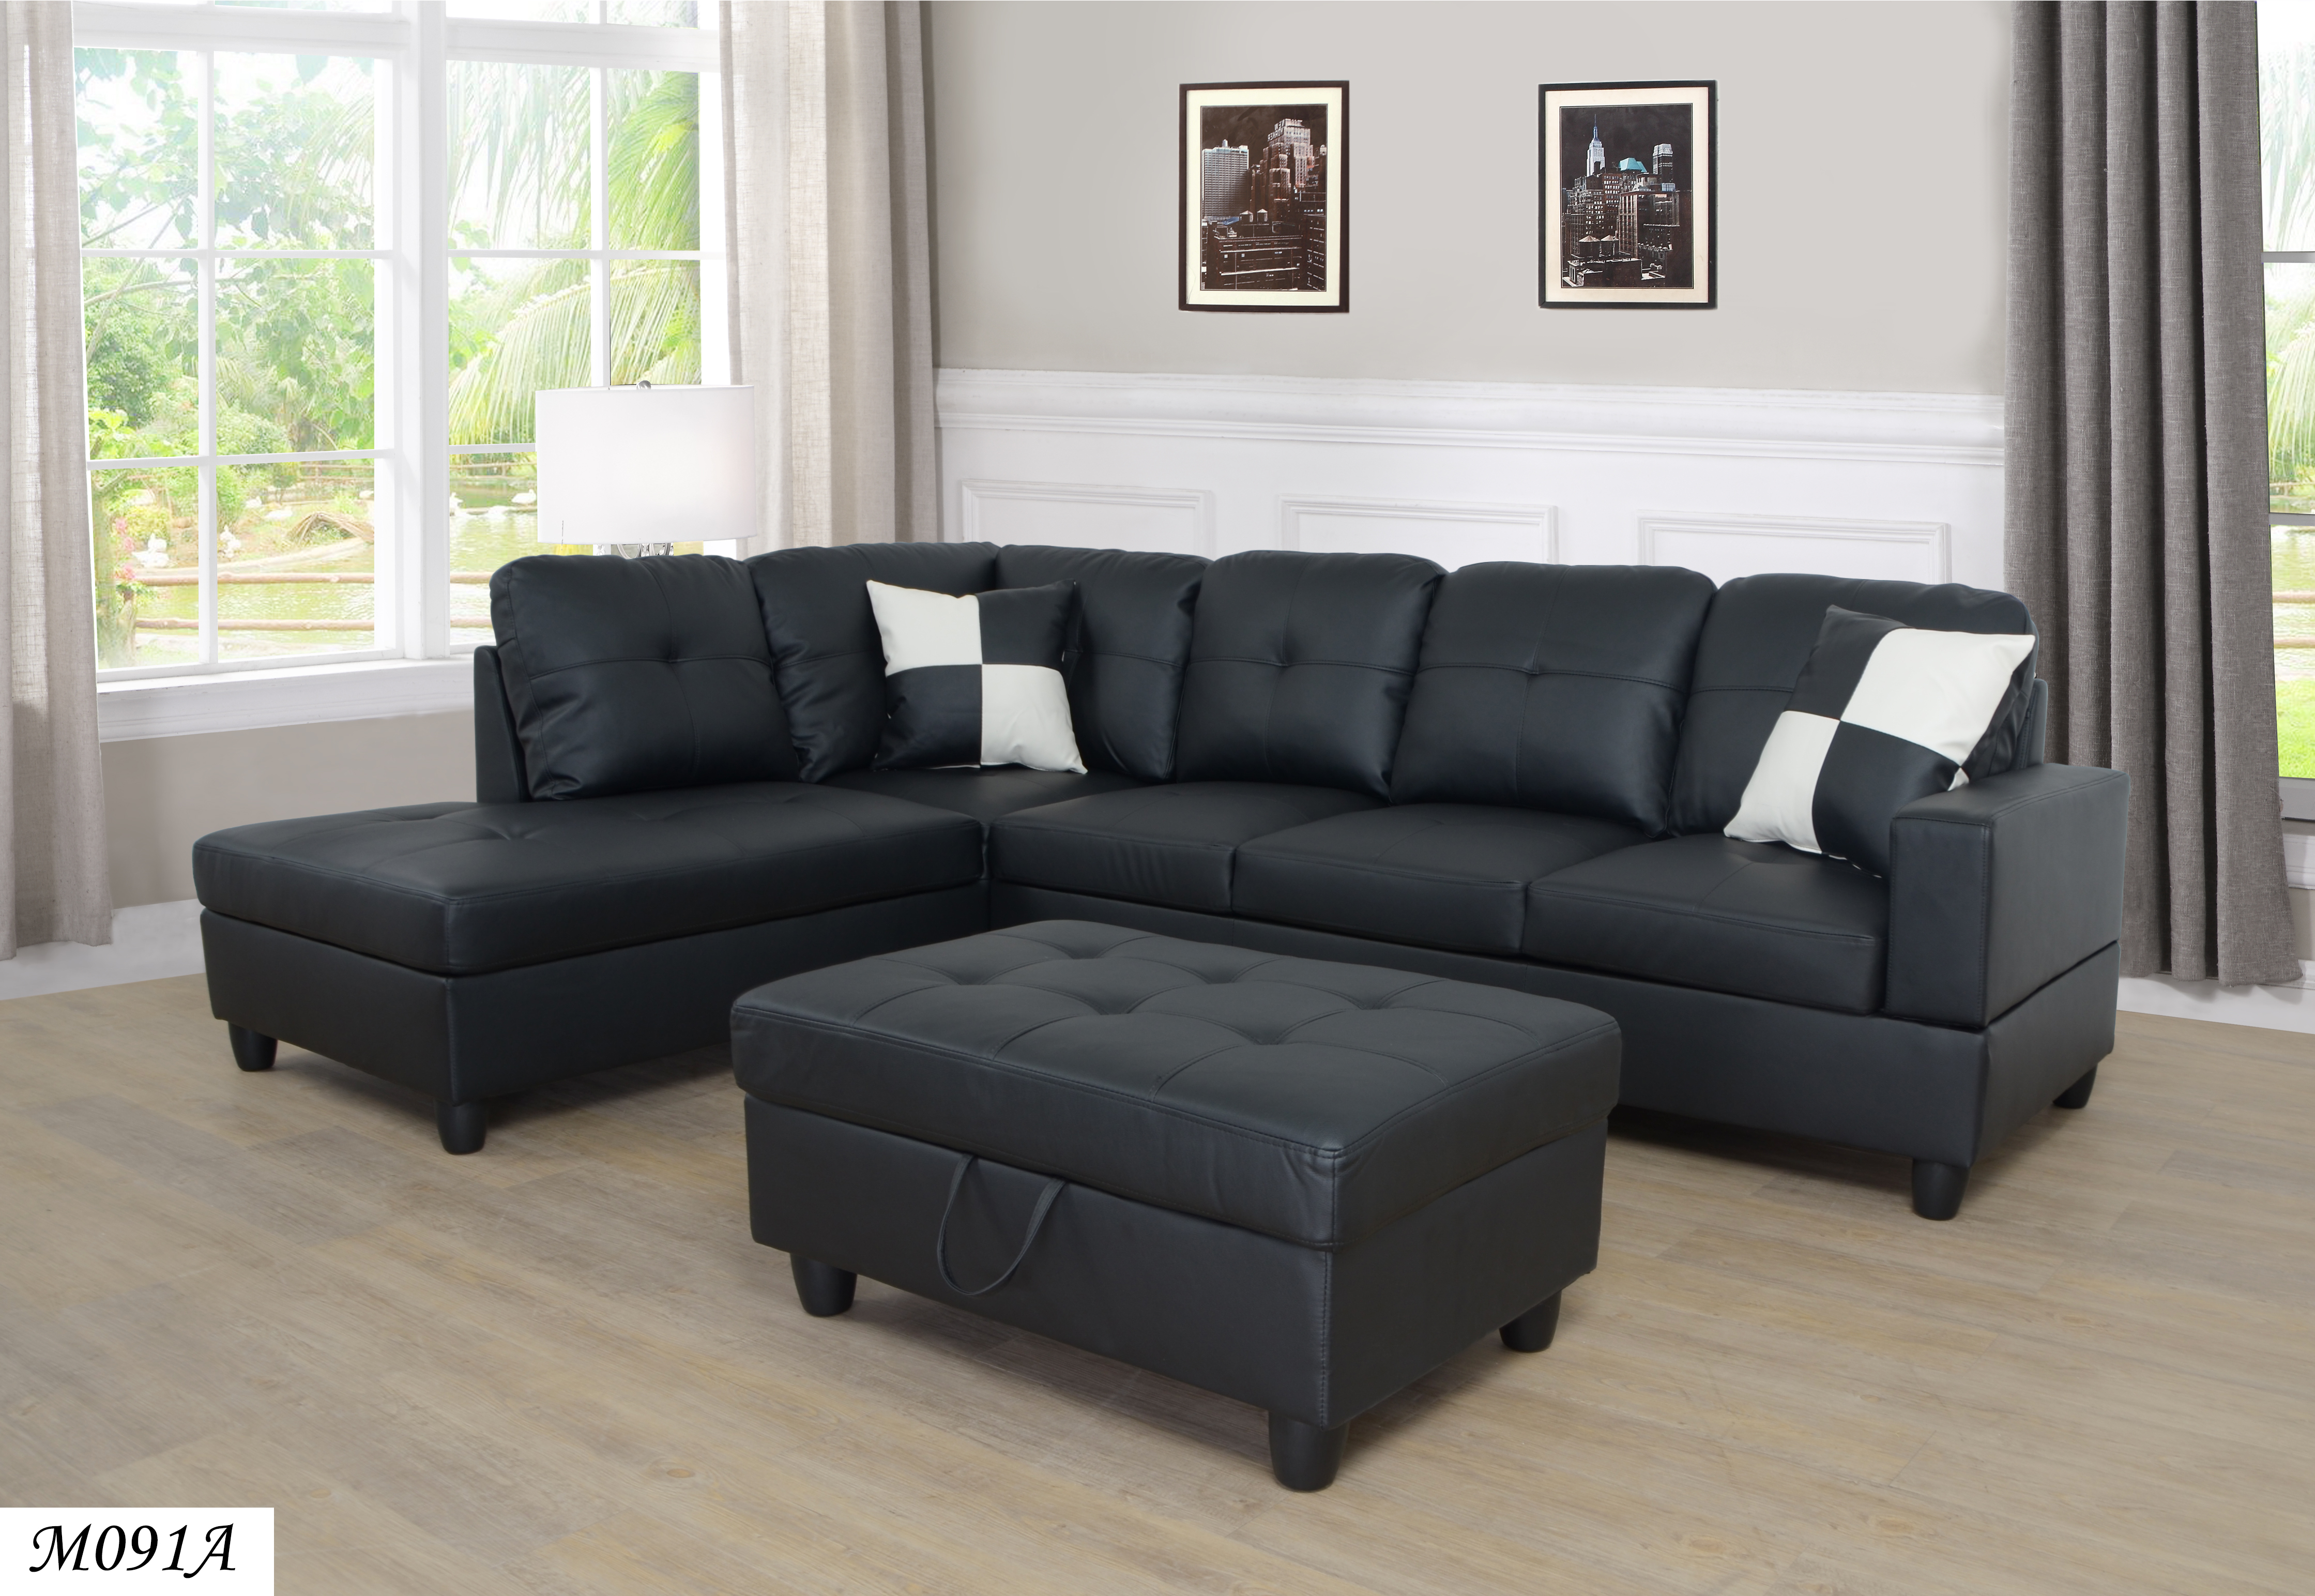 3 PC Sectional Sofa Set, (Black) Faux Leather Left -Facing Chaise with Free Storage Ottoman-CASAINC